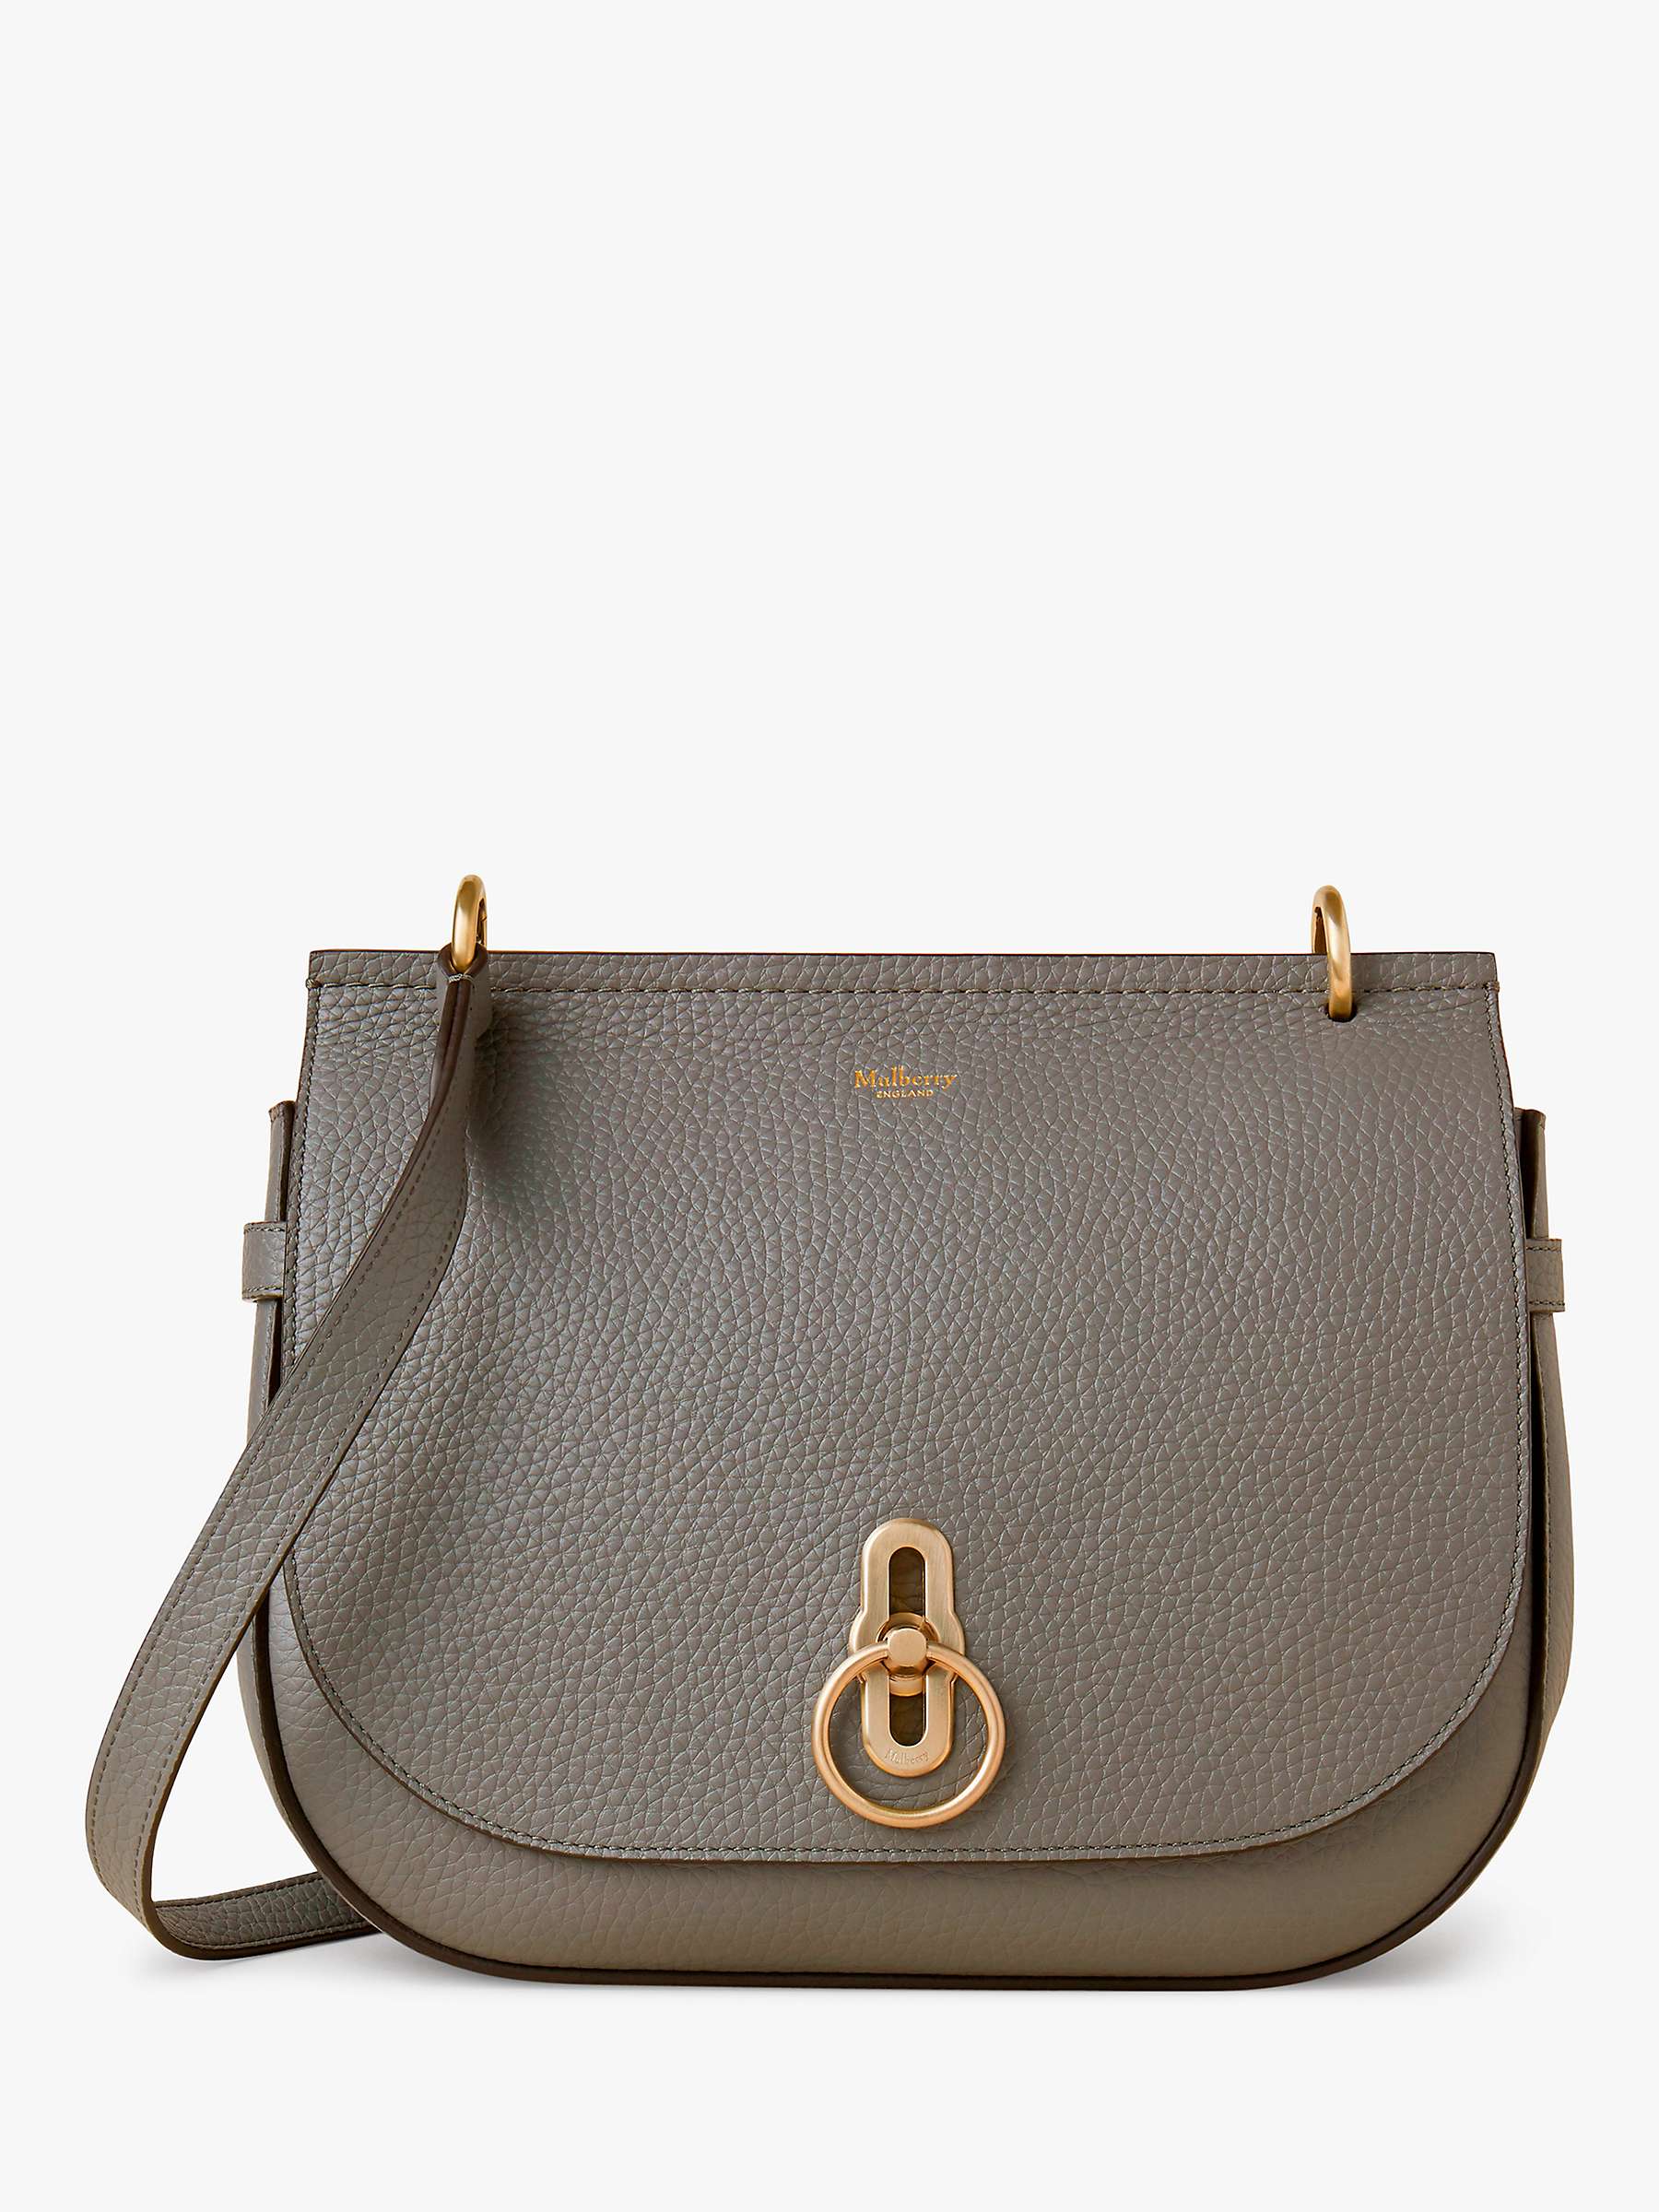 Buy Mulberry Soft Amberley Heavy Grain Leather Satchel Bag Online at johnlewis.com